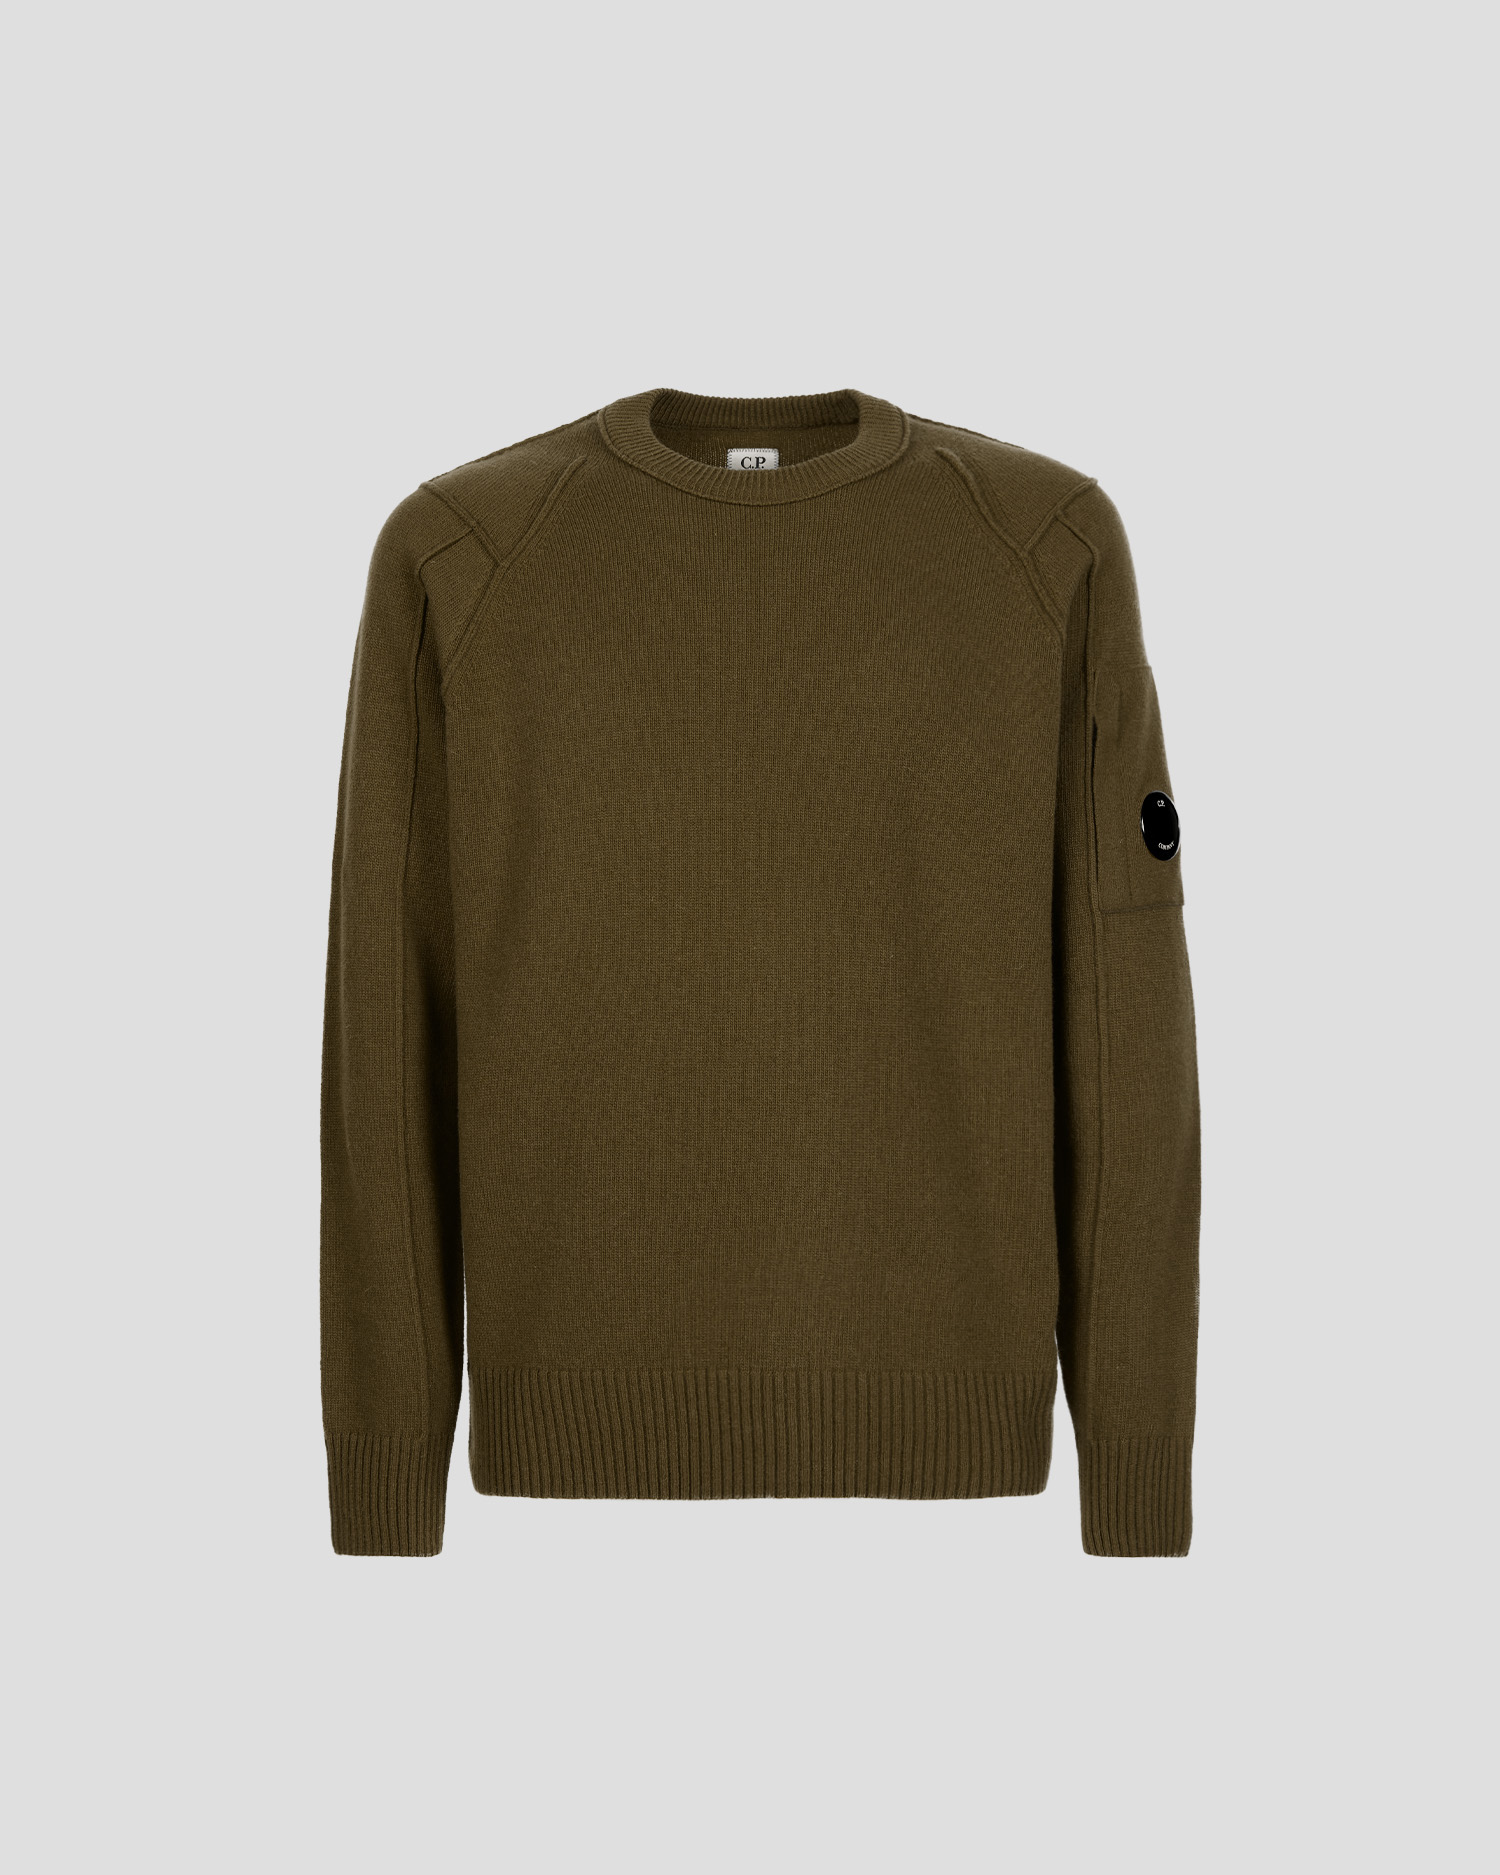 cp-company-cp-company-knitwear-crew-neck-lambswool-ivy-green-48